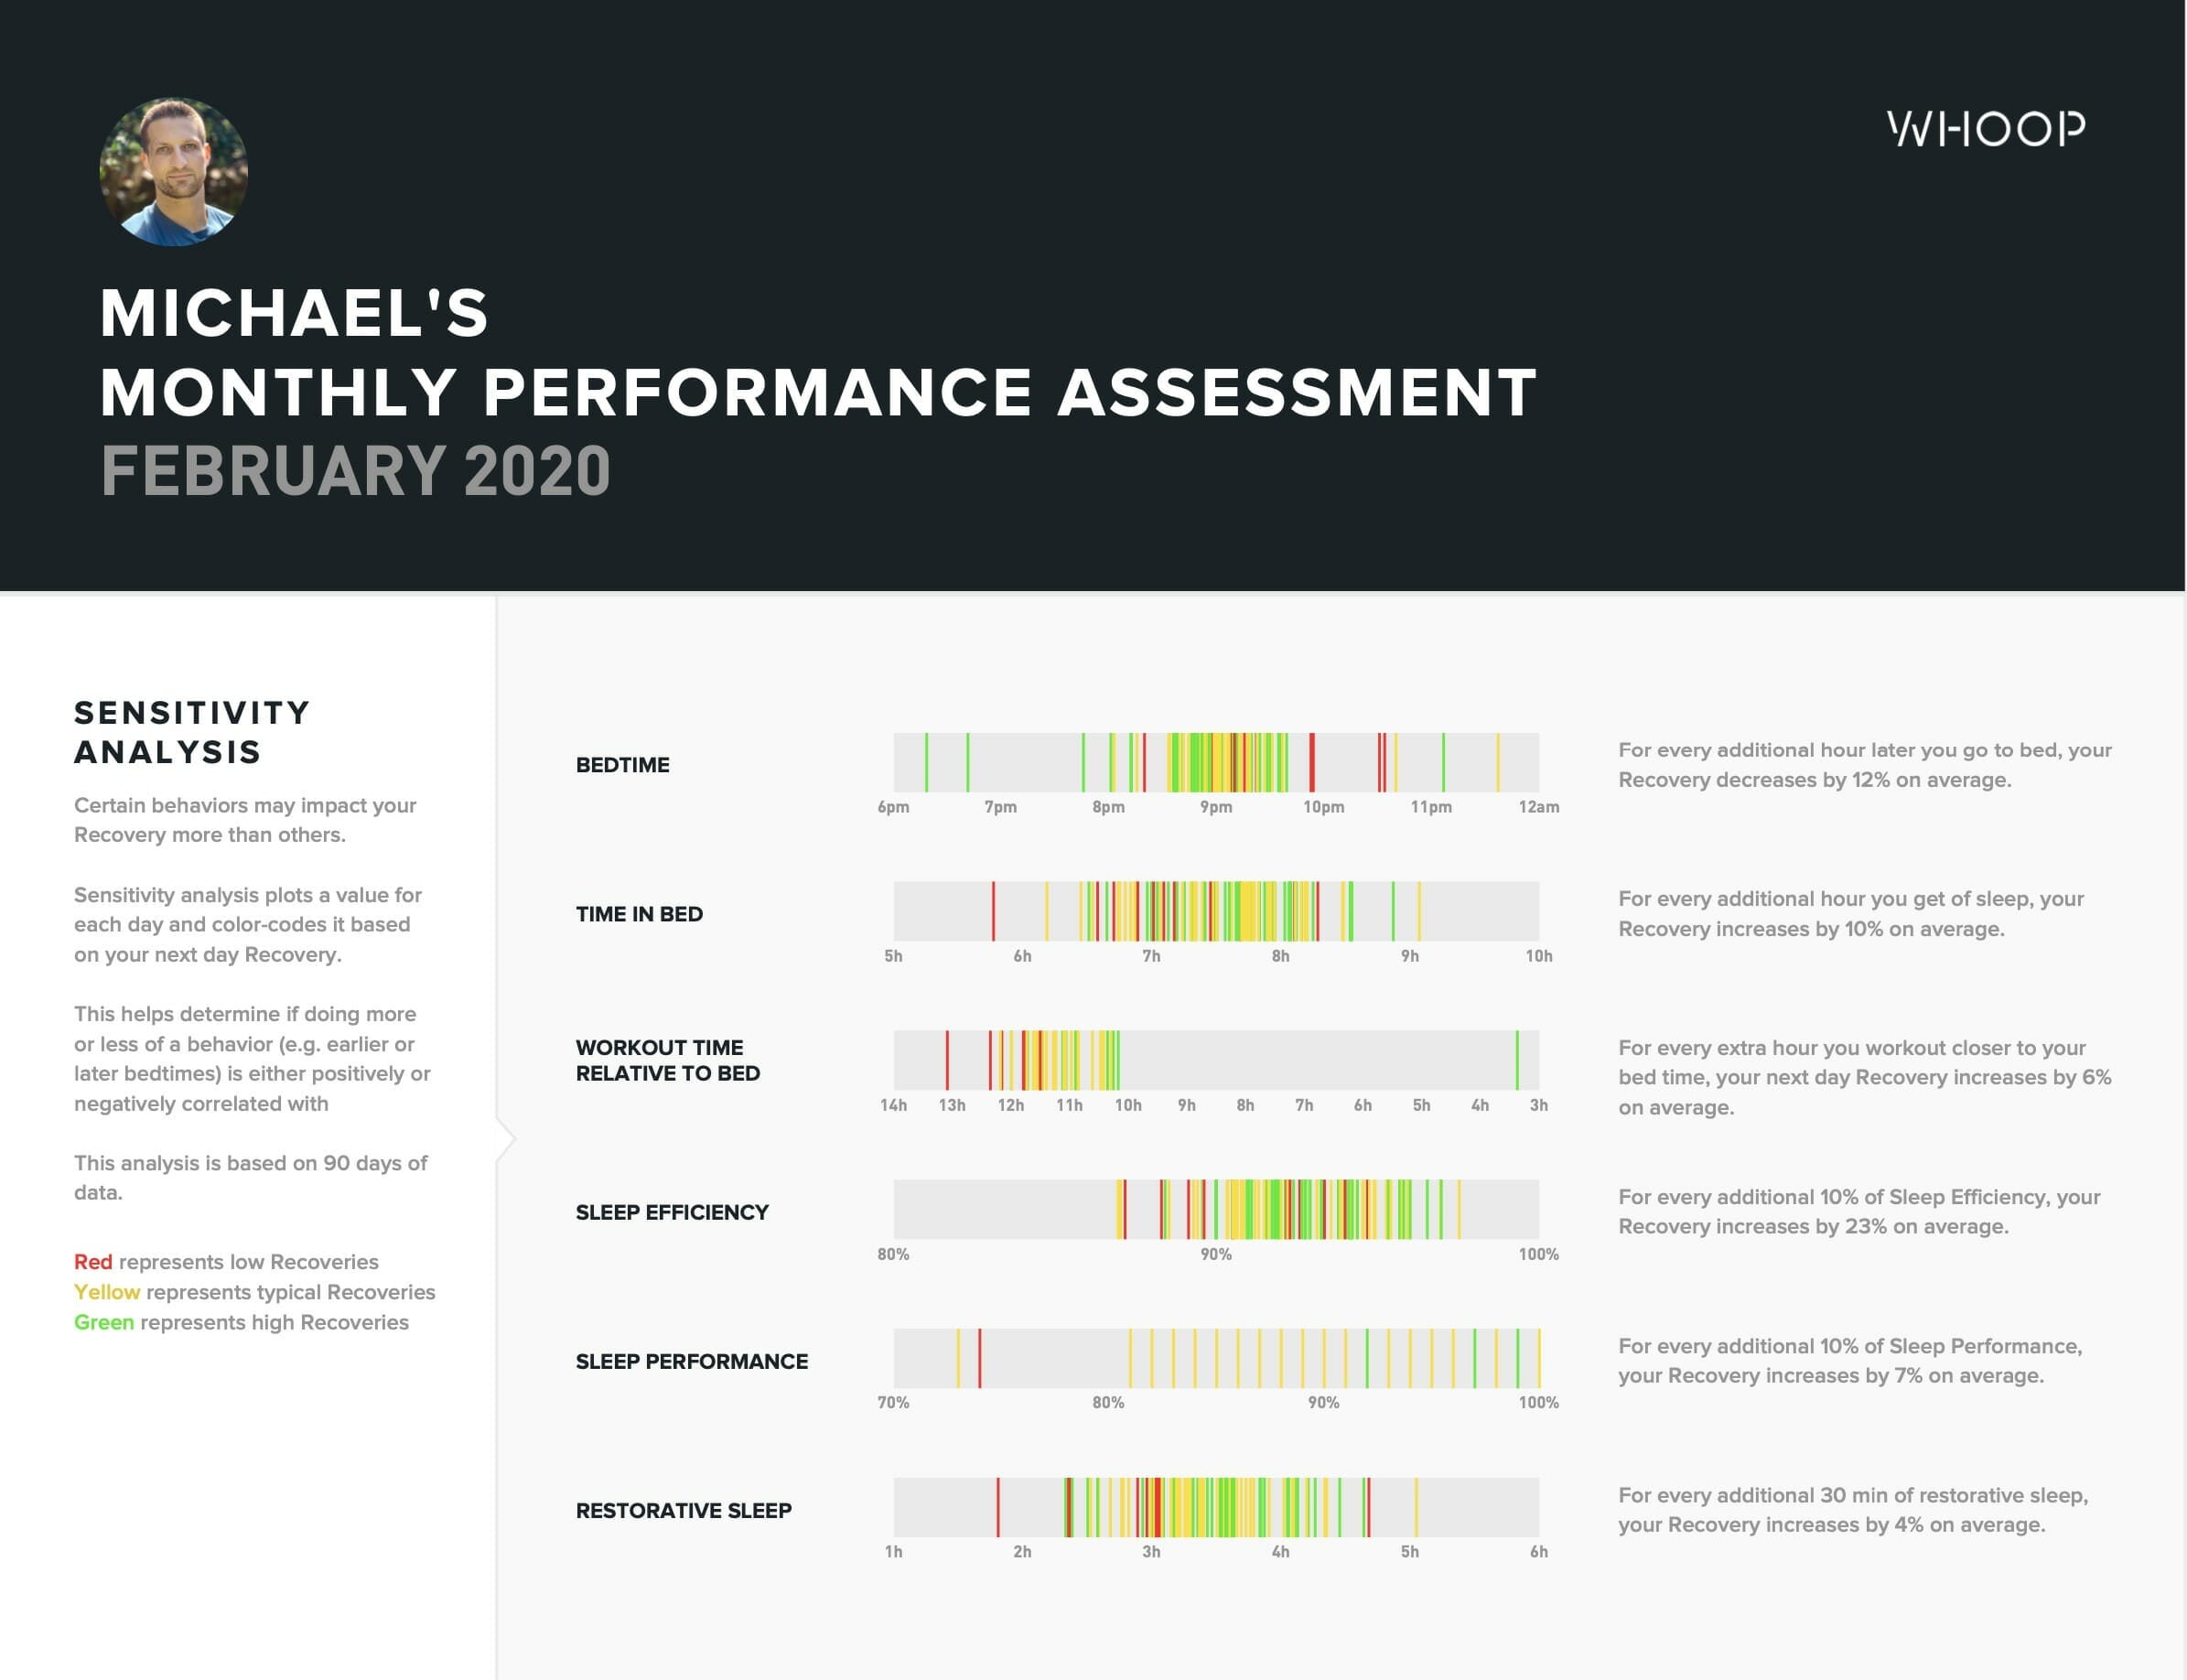 Michael's Monthly Performance Assessment - WHOOP